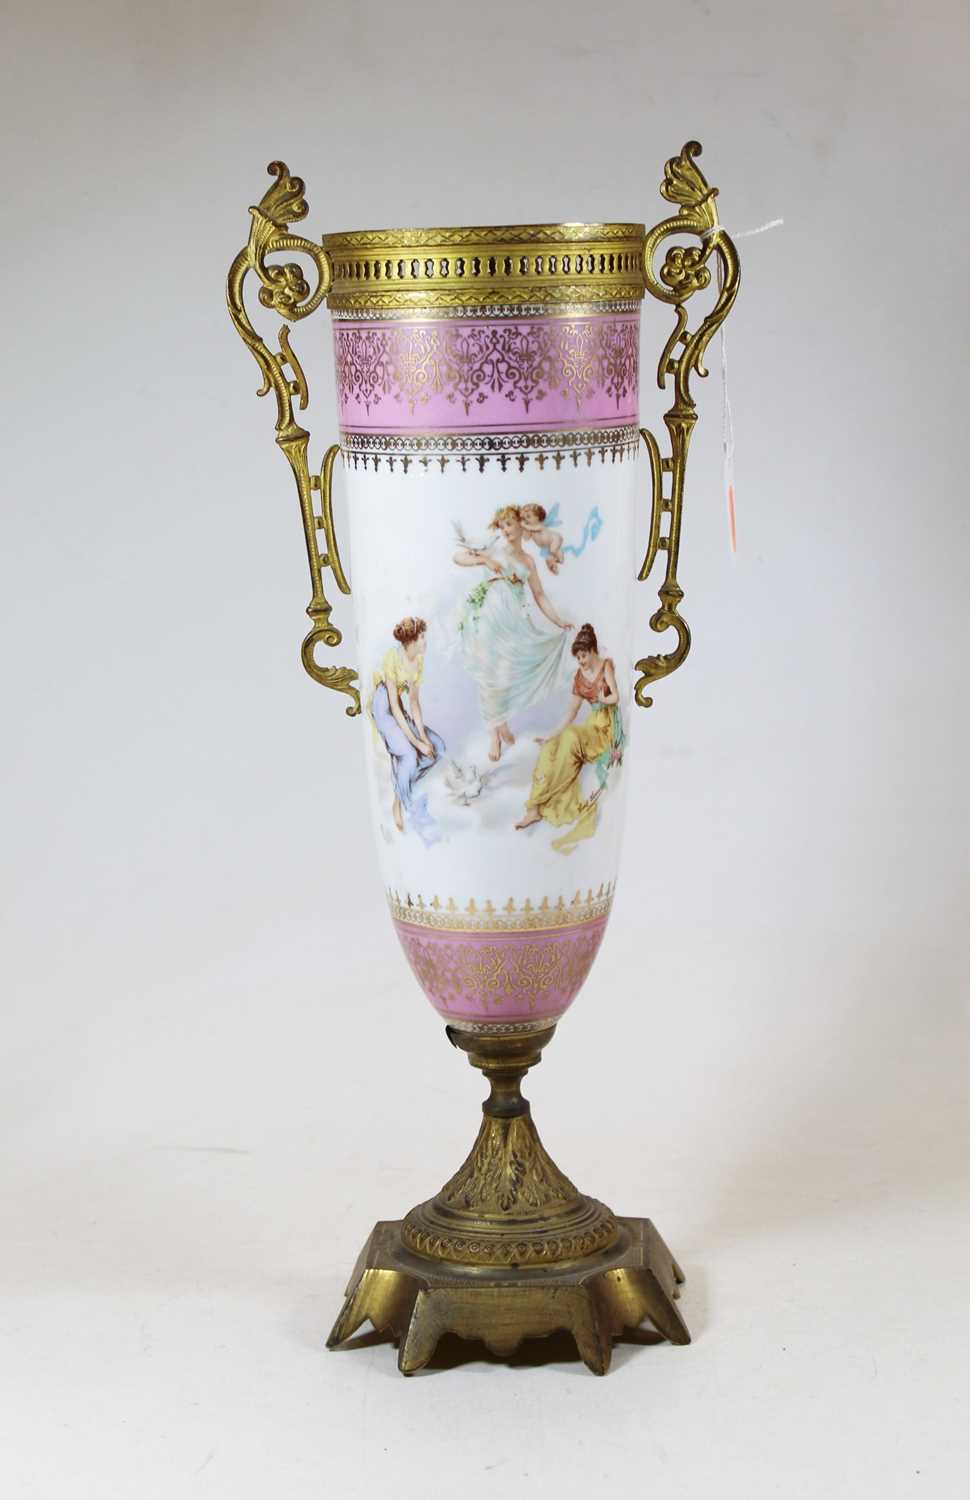 A circa 1900 Continental porcelain and gilt metal mounted urn, decorated with allegorical scenes,